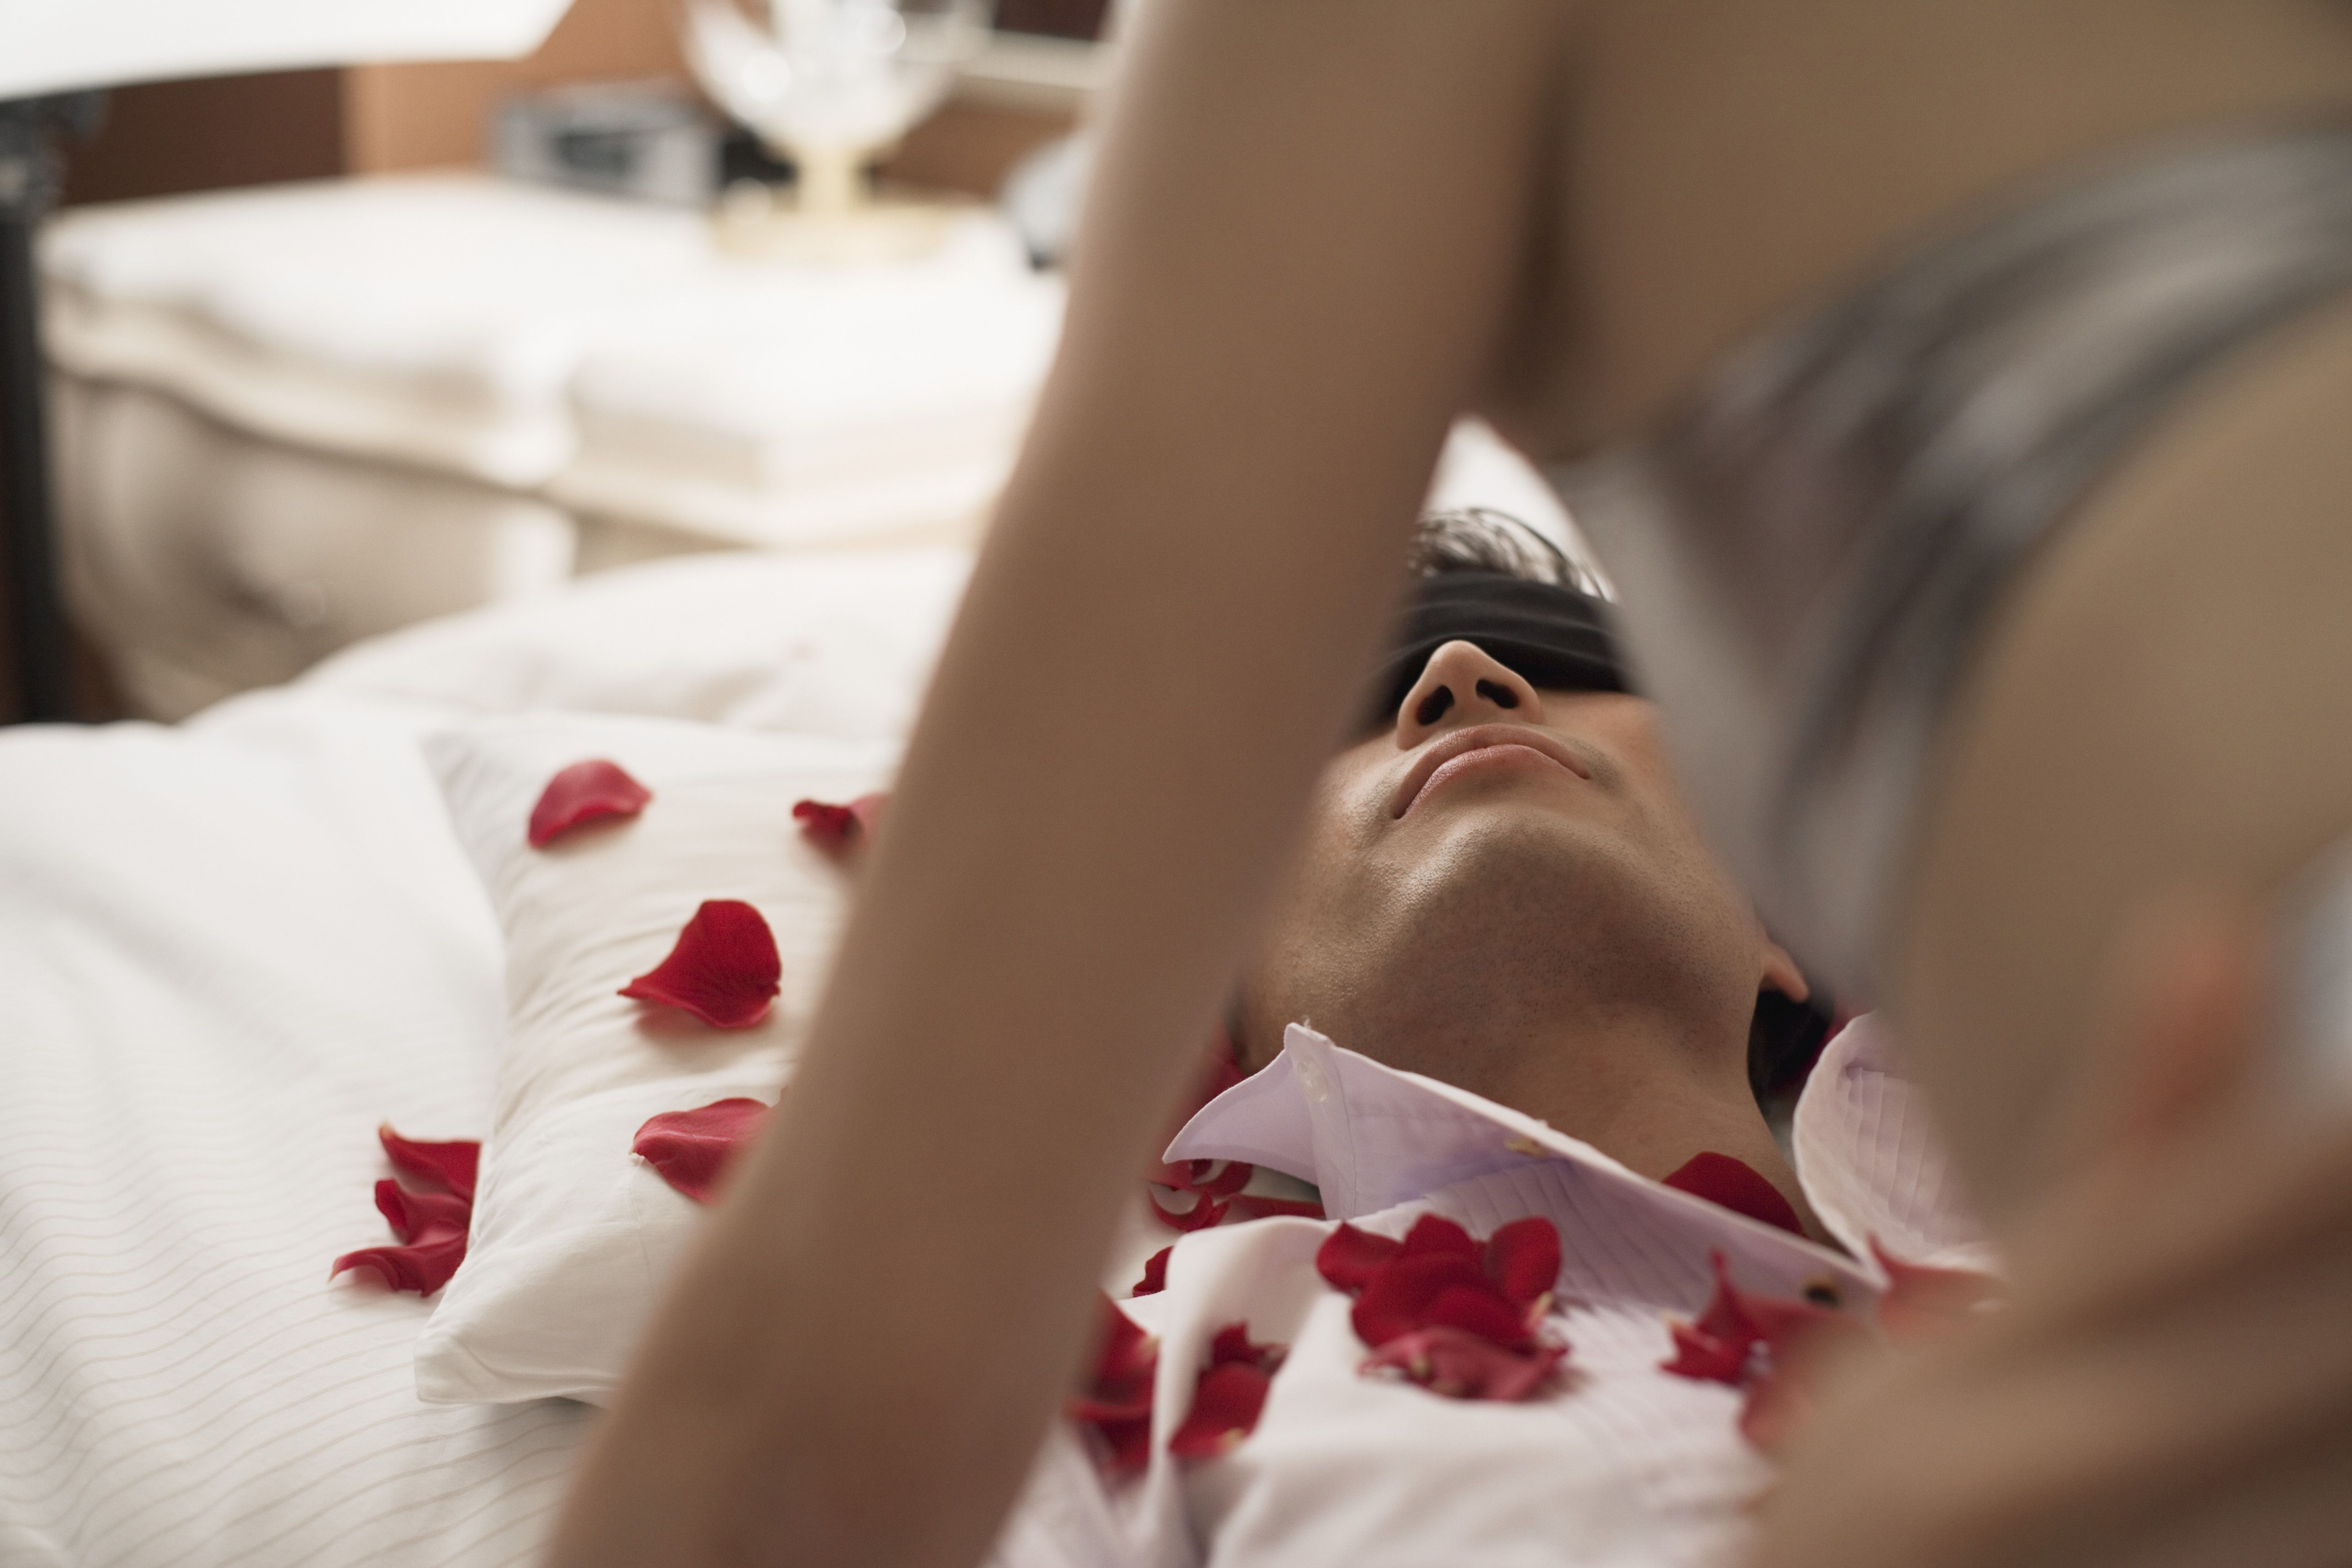 10 Common Sexual Fantasies and How to Fulfill Them